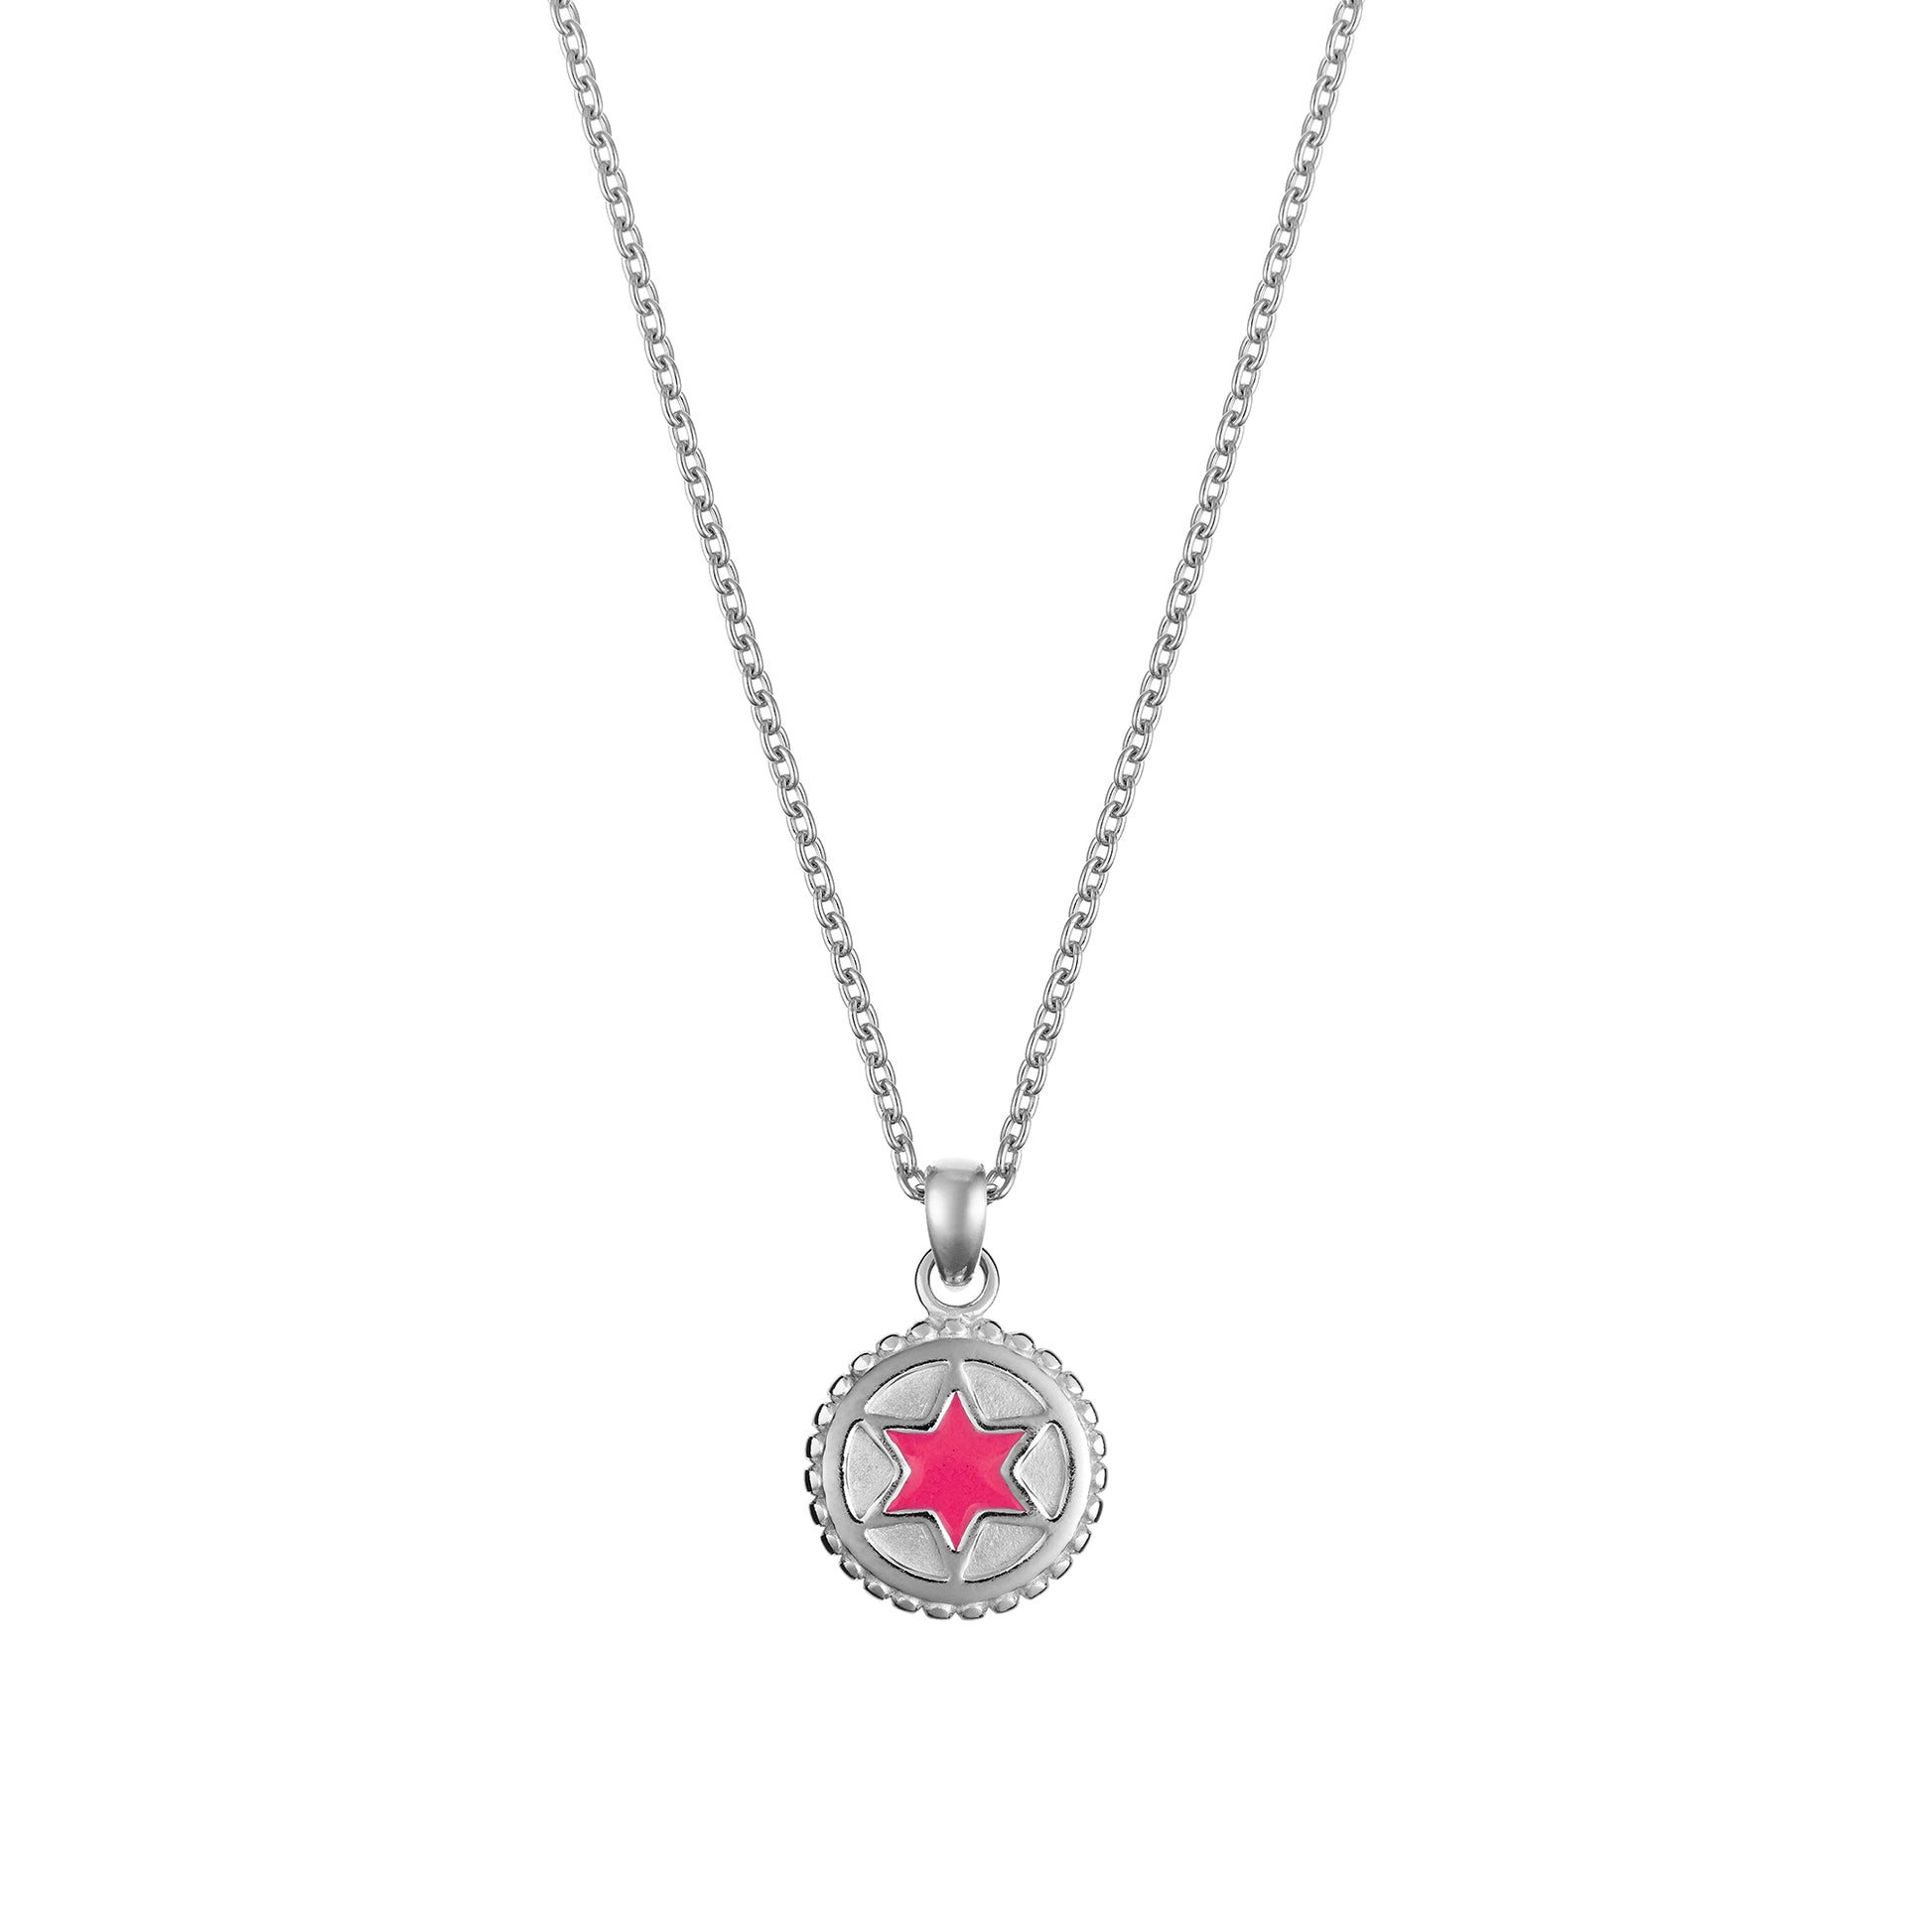 Silver necklace with a pink enamel star of David